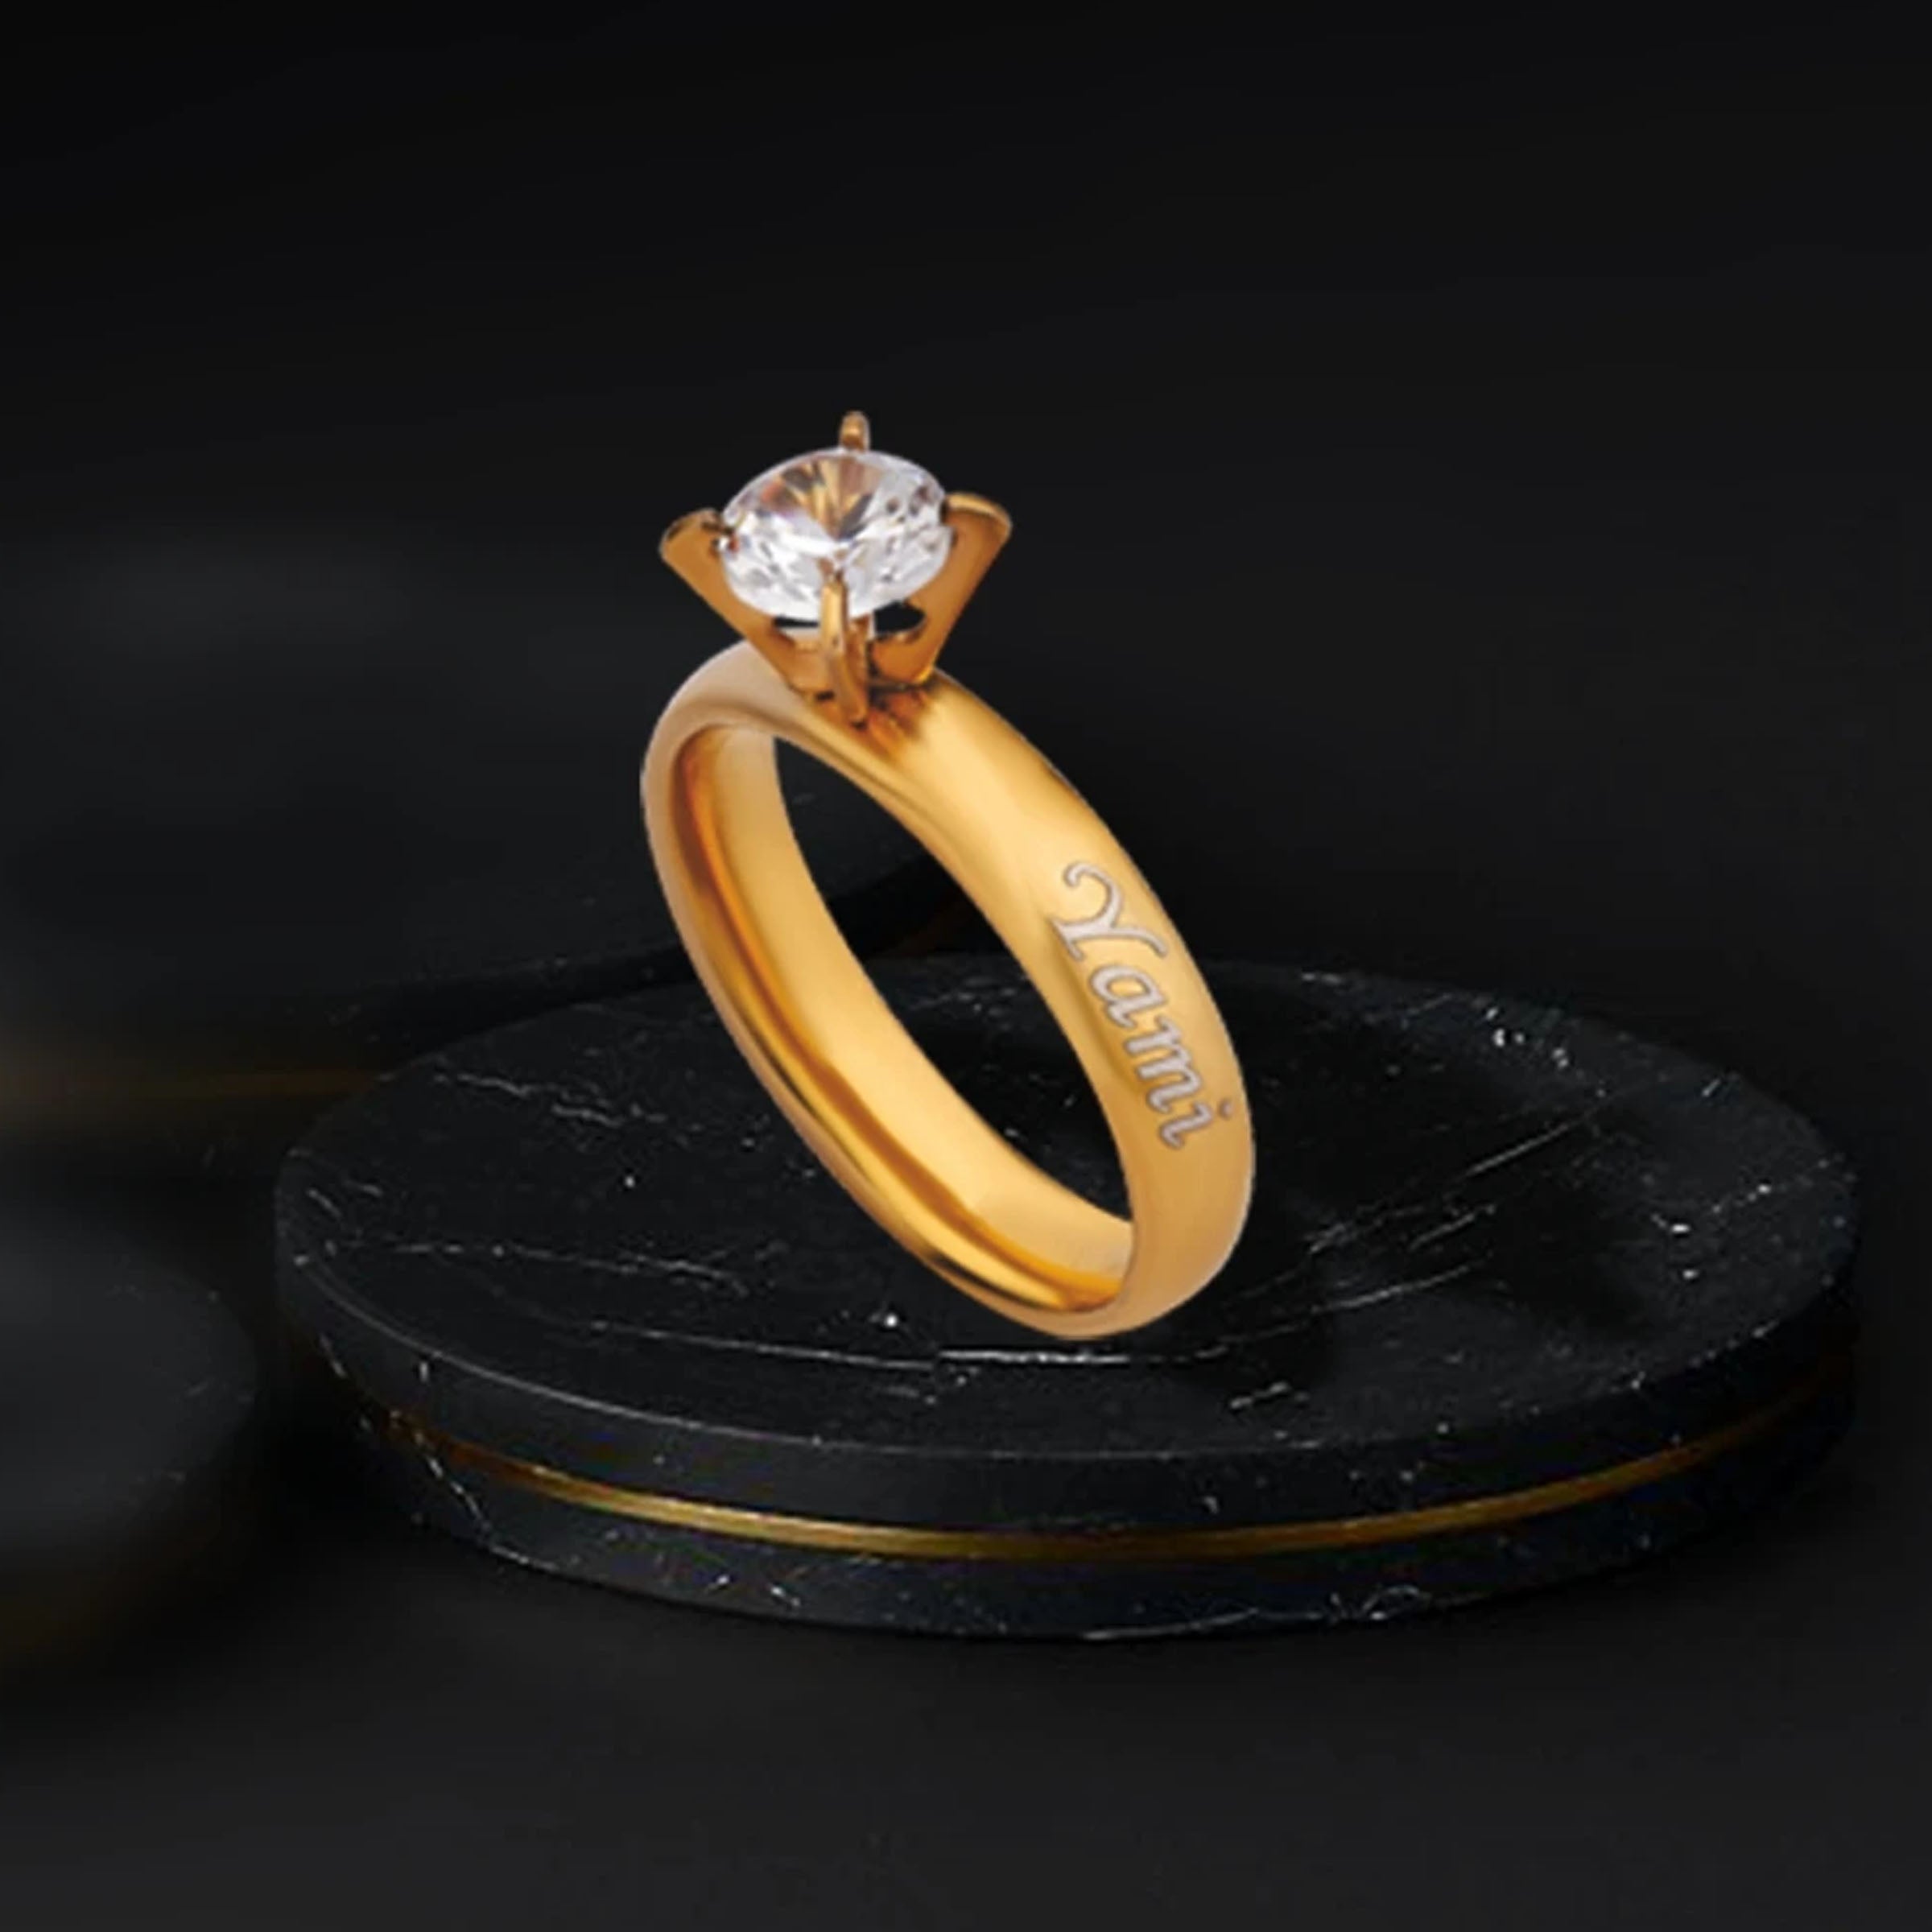 Couple ring design, Engagement rings couple, Wedding ring designs